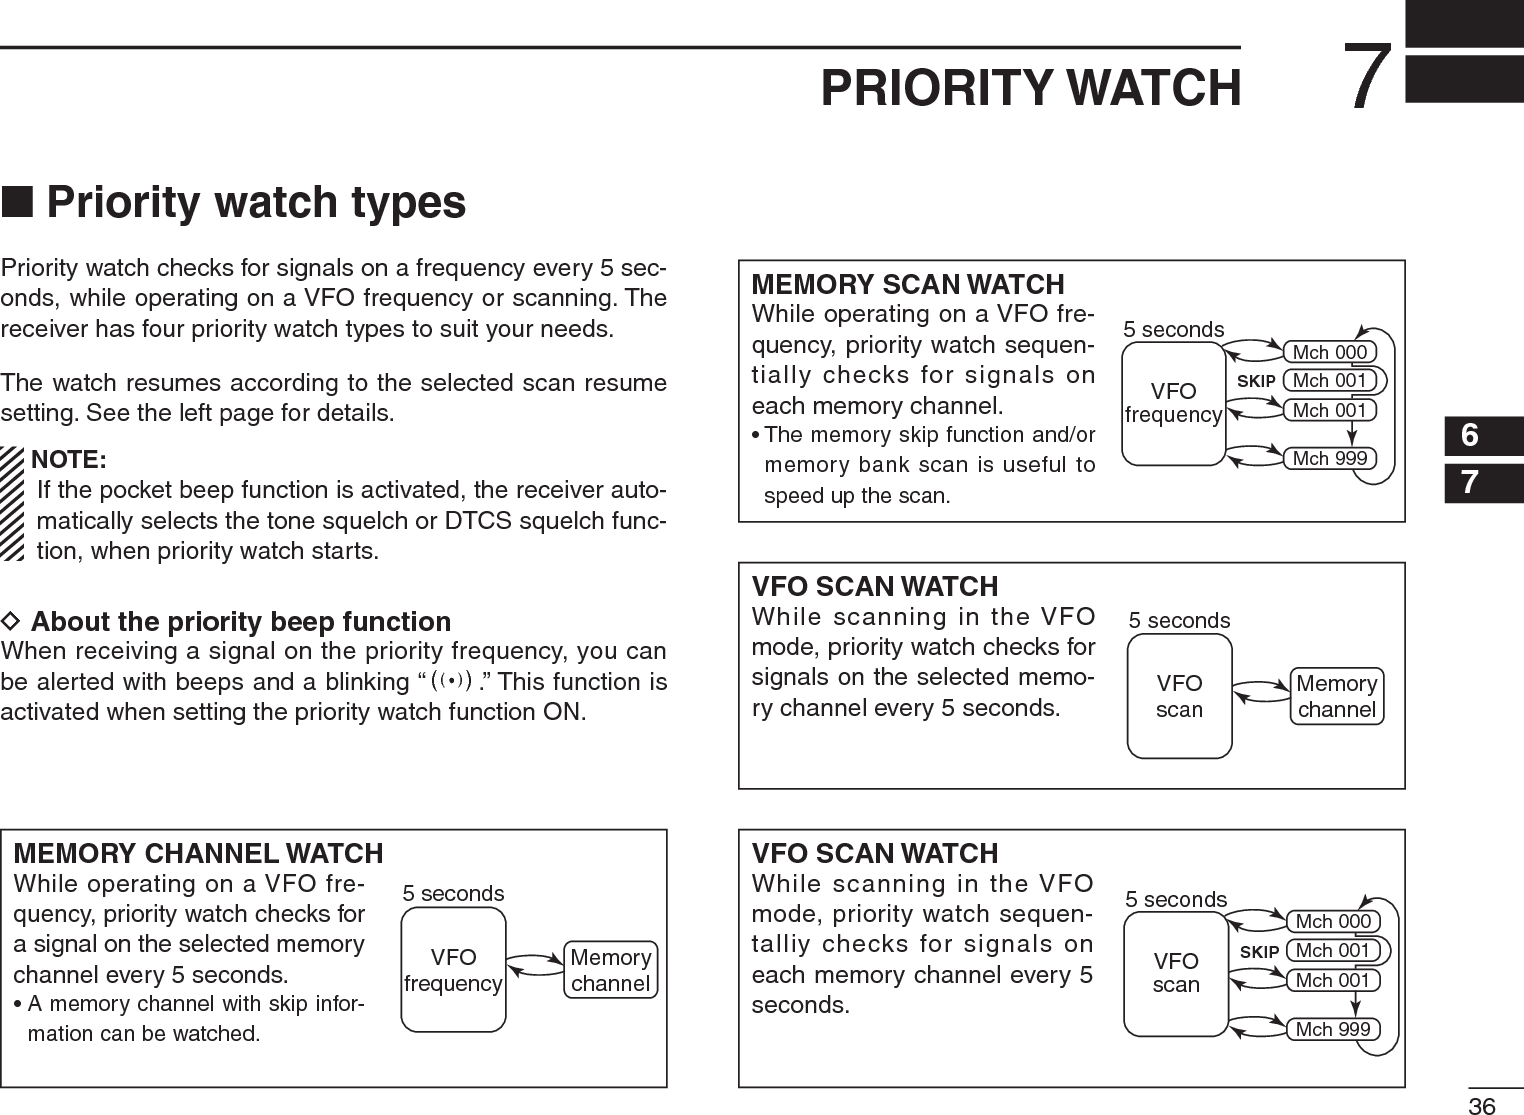 367PRIORITY WATCH67N Priority watch typesPriority watch checks for signals on a frequency every 5 sec-onds, while operating on a VFO frequency or scanning. The receiver has four priority watch types to suit your needs. The watch resumes according to the selected scan resume setting. See the left page for details.NOTE:If the pocket beep function is activated, the receiver auto-matically selects the tone squelch or DTCS squelch func-tion, when priority watch starts.D About the priority beep functionWhen receiving a signal on the priority frequency, you can be alerted with beeps and a blinking “S.” This function is activated when setting the priority watch function ON.MEMORY CHANNEL WATCHWhile operating on a VFO fre-quency, priority watch checks for a signal on the selected memory channel every 5 seconds.• A memory channel with skip infor-mation can be watched.MEMORY SCAN WATCHWhile operating on a VFO fre-quency, priority watch sequen-tially checks for signals on each memory channel.• The memory skip function and/or memory bank scan is useful to speed up the scan.5 secondsVFOfrequencyMemorychannel5 secondsVFOfrequencySKIPMch 000Mch 001Mch 001Mch 999VFO SCAN WATCHWhile scanning in the VFO mode, priority watch checks for signals on the selected memo-ry channel every 5 seconds.5 secondsVFOscanMemorychannelVFO SCAN WATCHWhile scanning in the VFO mode, priority watch sequen-talliy checks for signals on each memory channel every 5 seconds.5 secondsVFOscanSKIPMch 000Mch 001Mch 001Mch 999